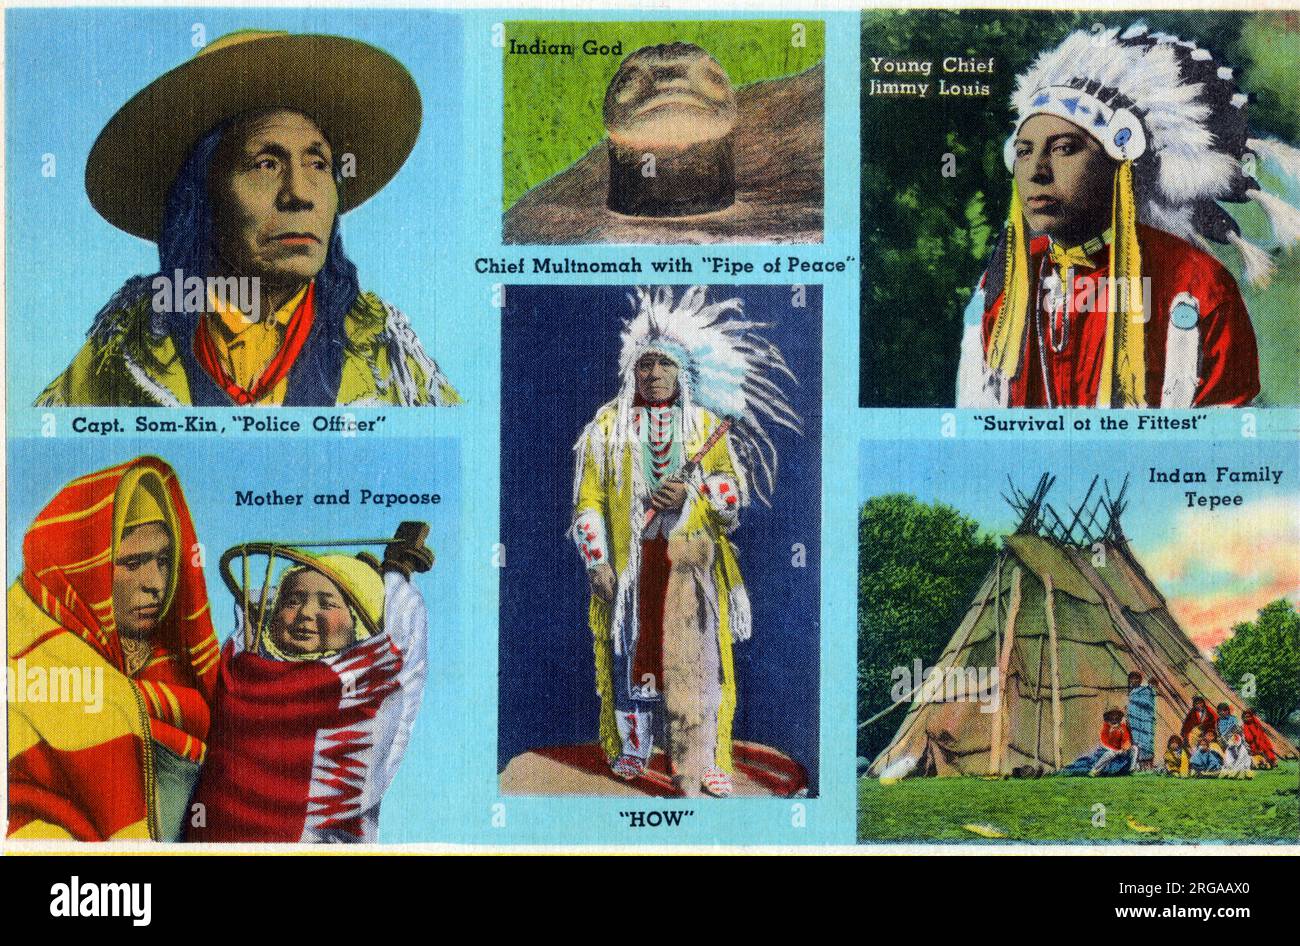 Portland, Oregon, USA - (Clockwise from top left): Captain Som-Kin, 'Police Officer'; An 'Indian God'; Young Chief Jimmy Louis; an Indian Mother and Papoose; Chief Multnomah with 'Pipe of Peace'; An Indian Family's Tepee. Stock Photo